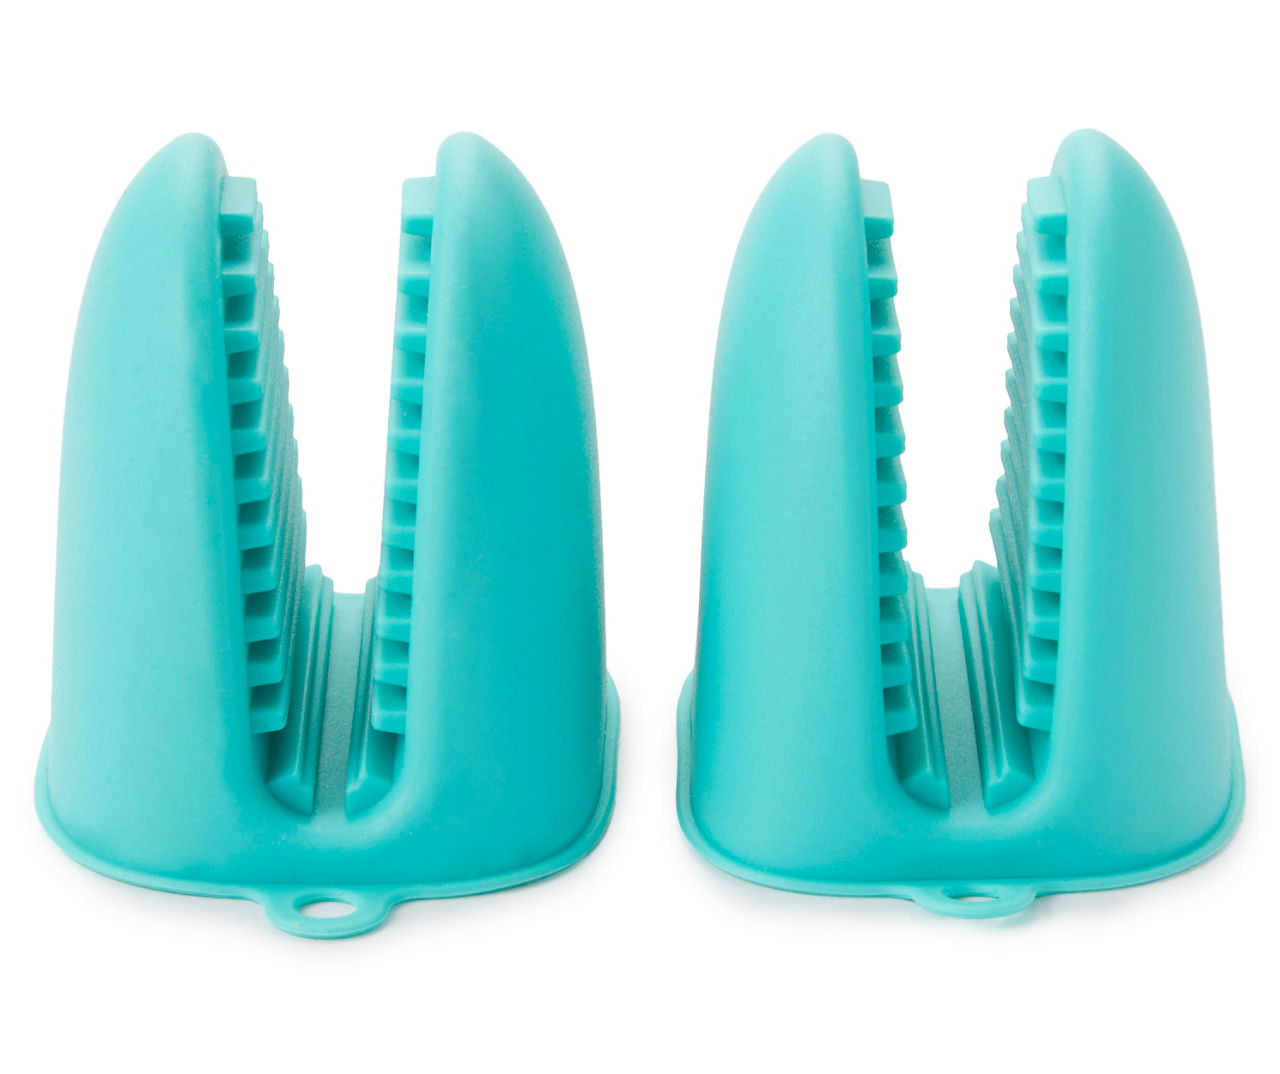 Zulay Kitchen Silicone Oven Mitts - Light Blue, 2 - Harris Teeter